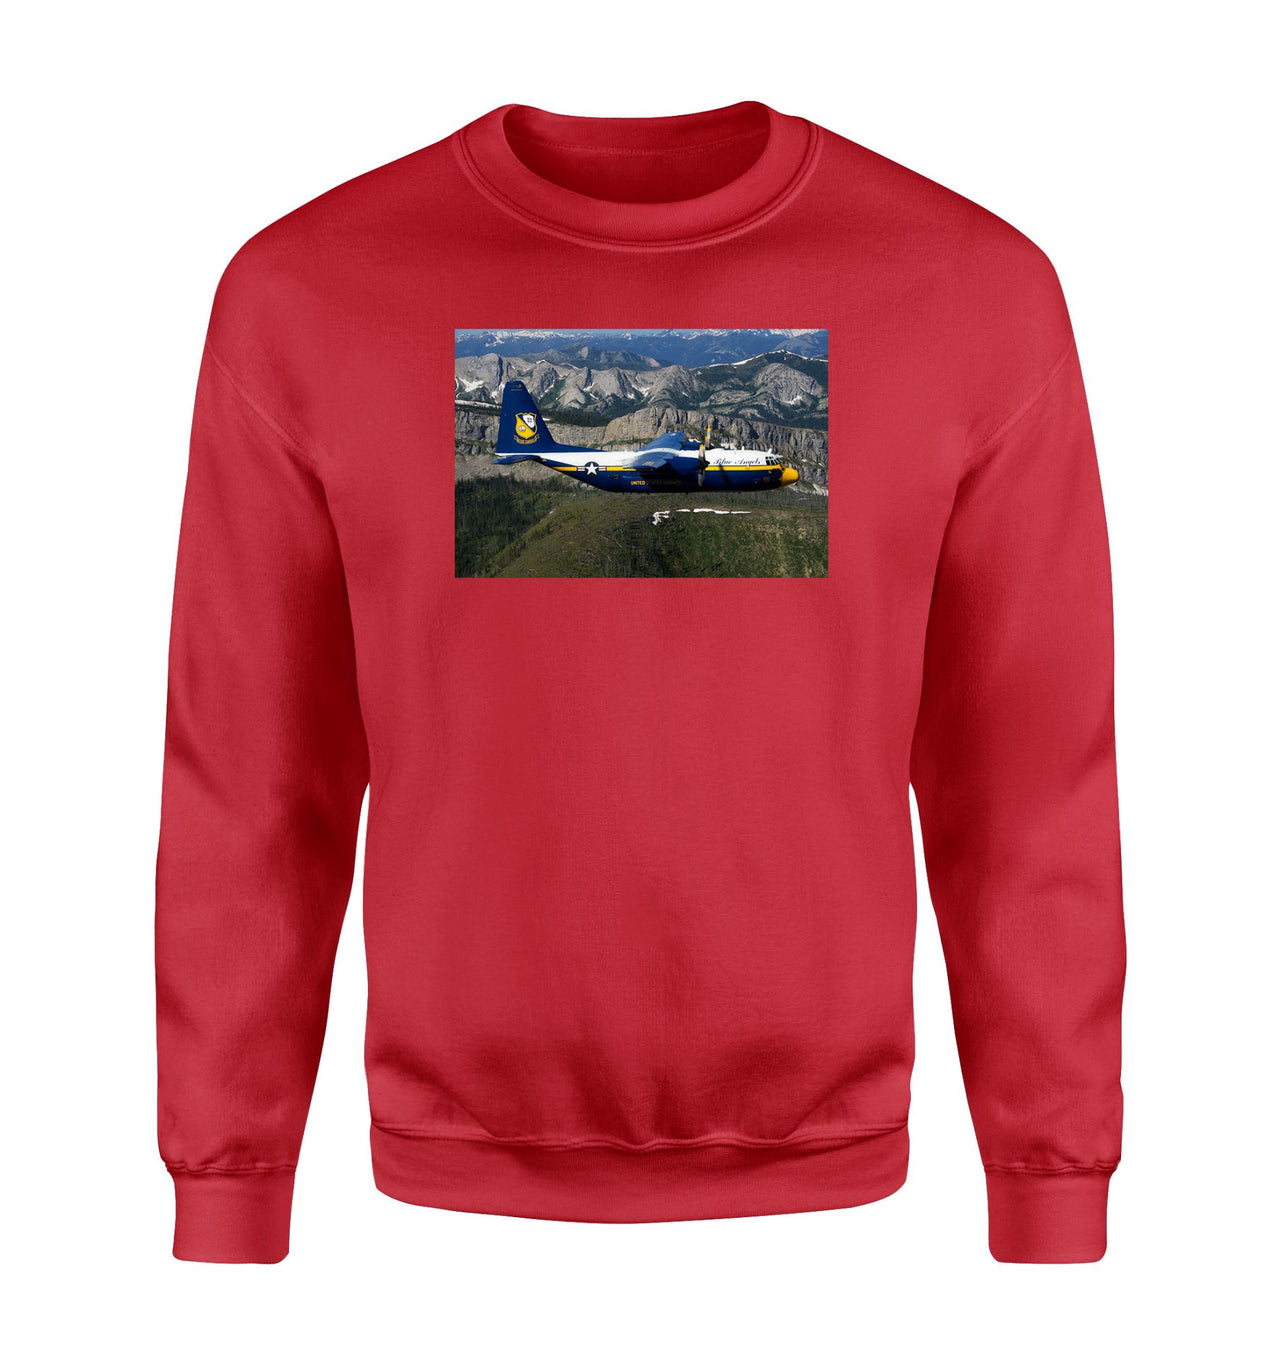 Amazing View with Blue Angels Aircraft Designed Sweatshirts